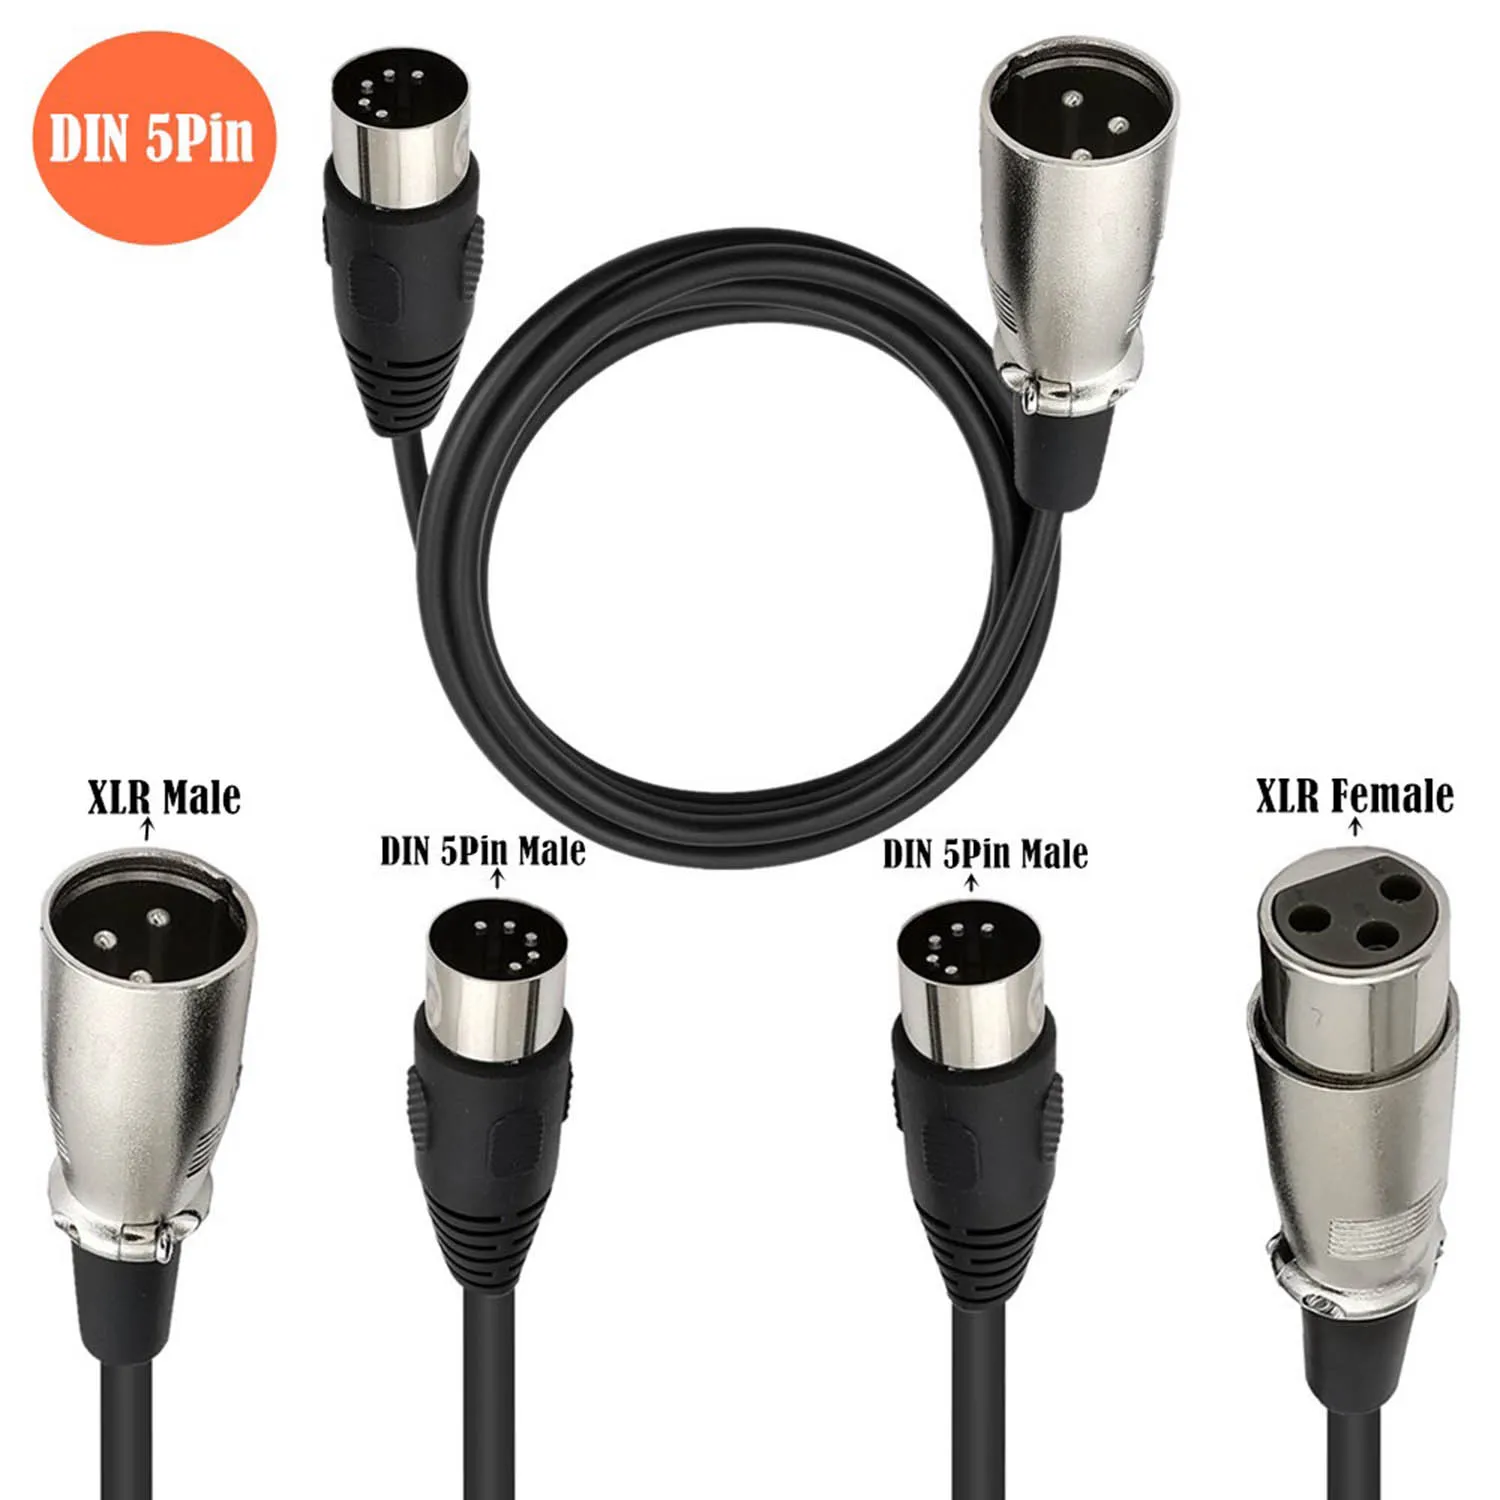 MIDI to XLR Adapter Cable DIN 5 Pin Male to XLR 3 Pin Audio Cable for Match Music Instruments with MIDI or XLR Connector